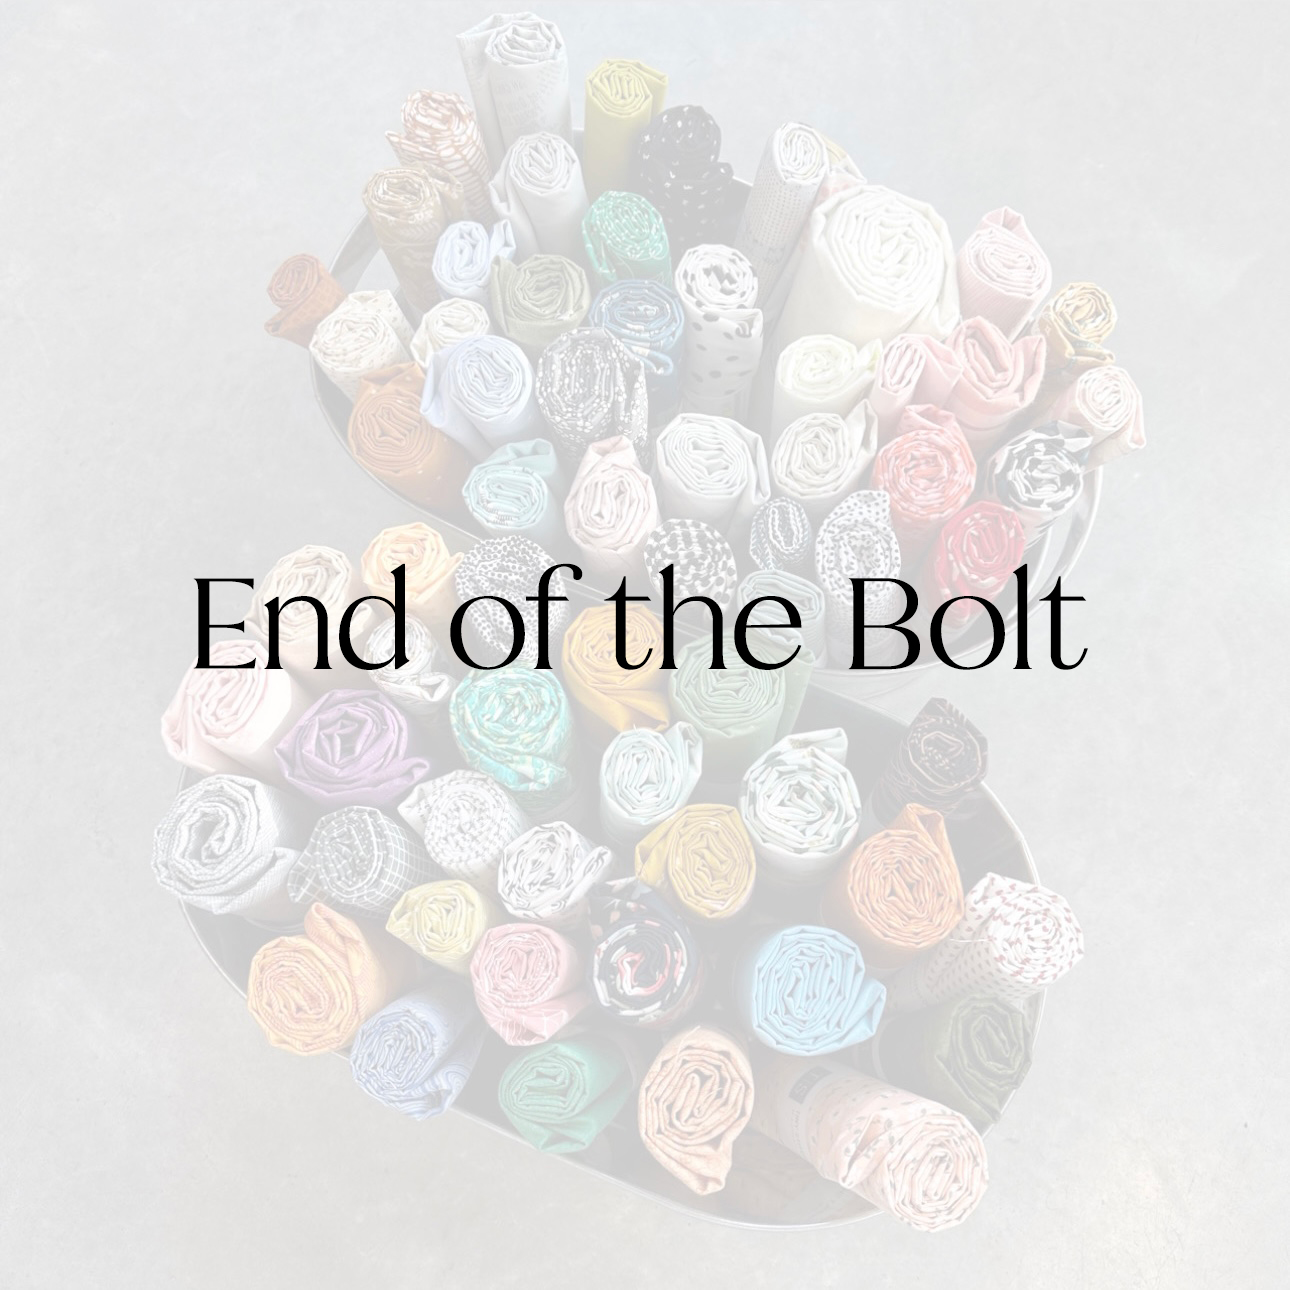 End of the Bolt